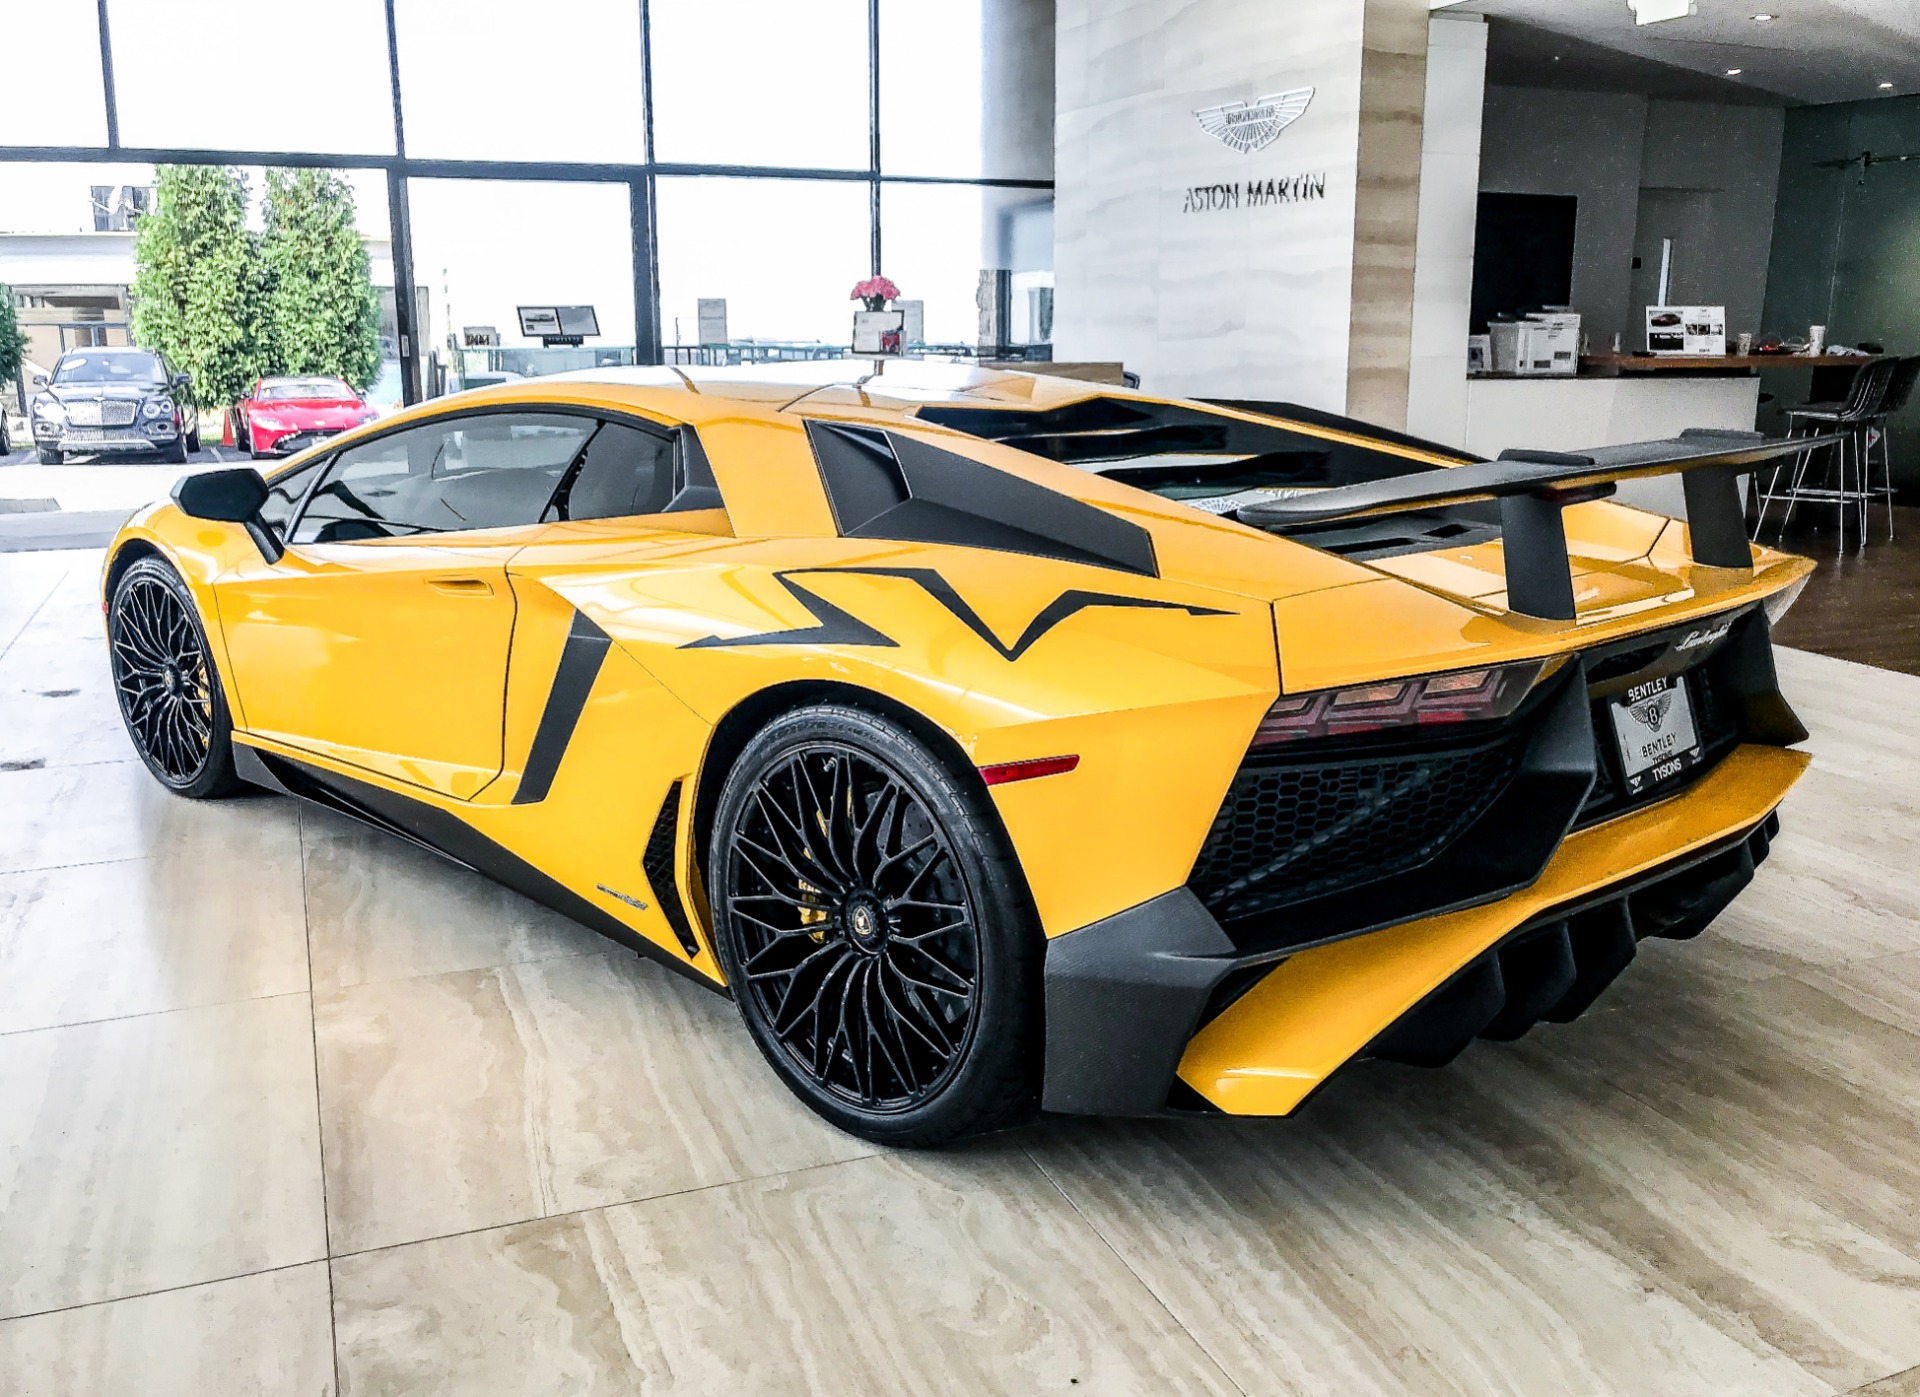 unpleasant touch Meaningless Used 2016 Lamborghini Aventador LP 750-4 SV For Sale (Sold) | Exclusive  Automotive Group - Koenigsegg DC Stock #9NR00079A